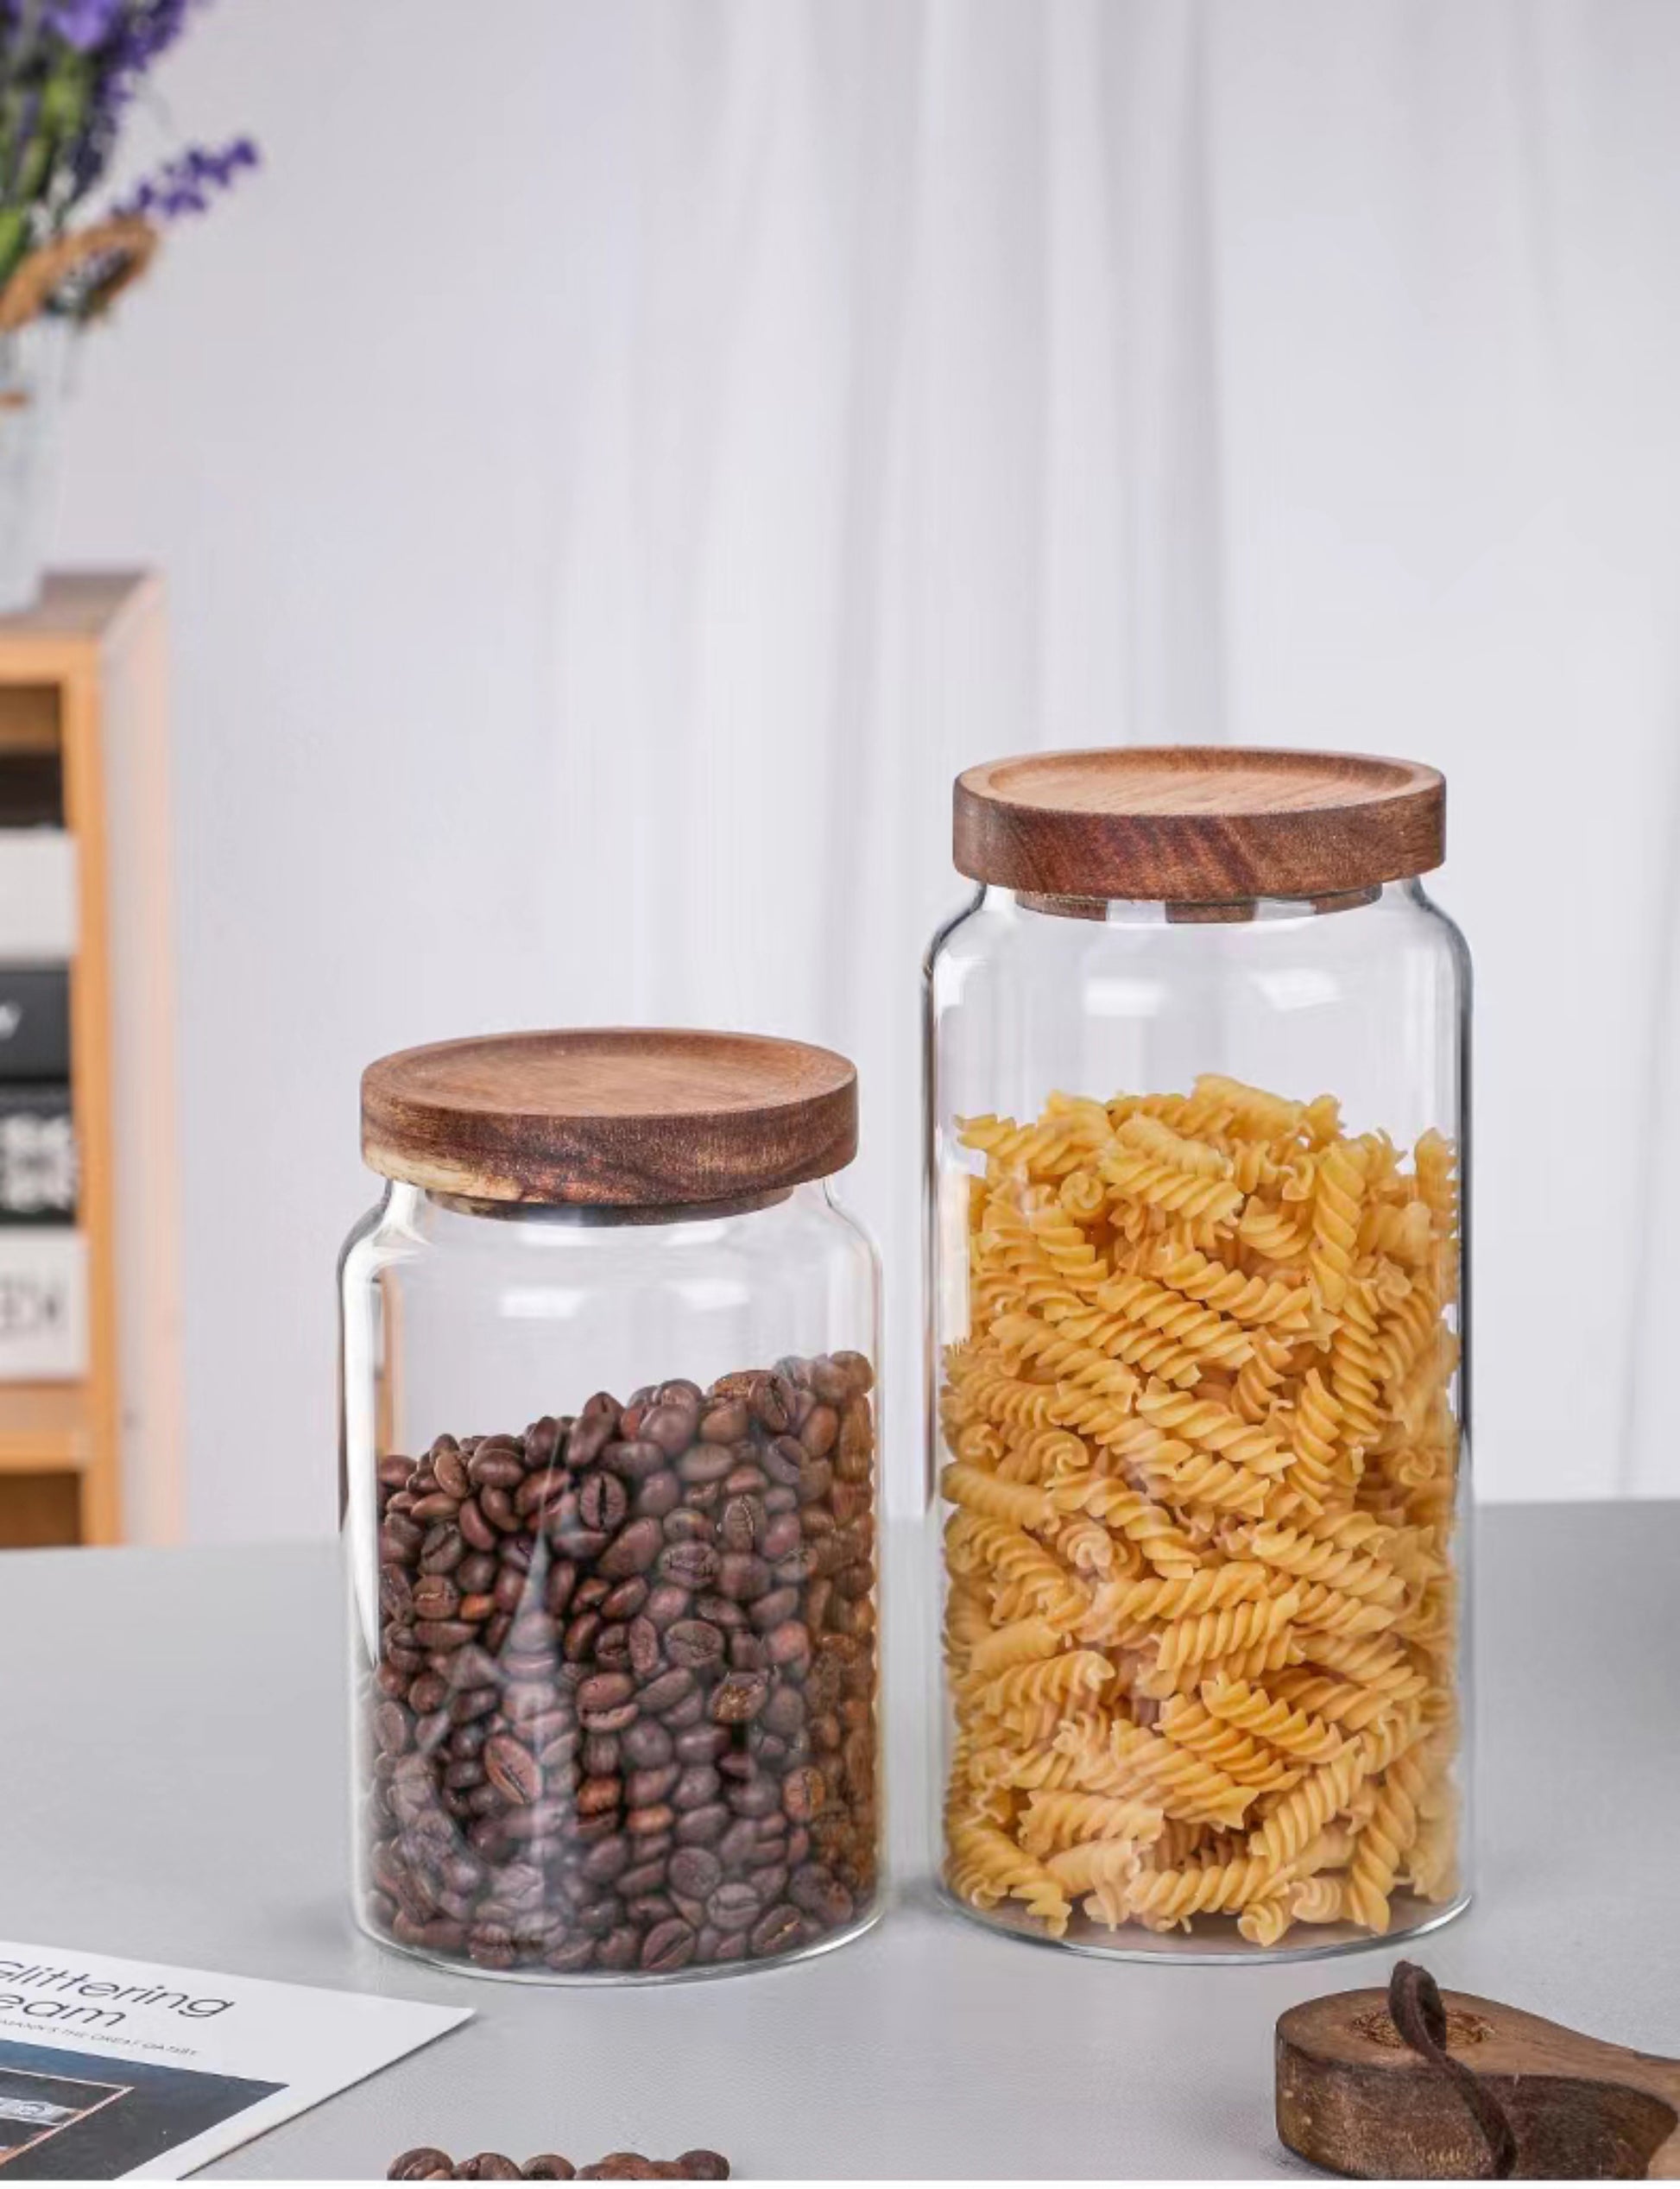 Two different size glass jars with acacia lids